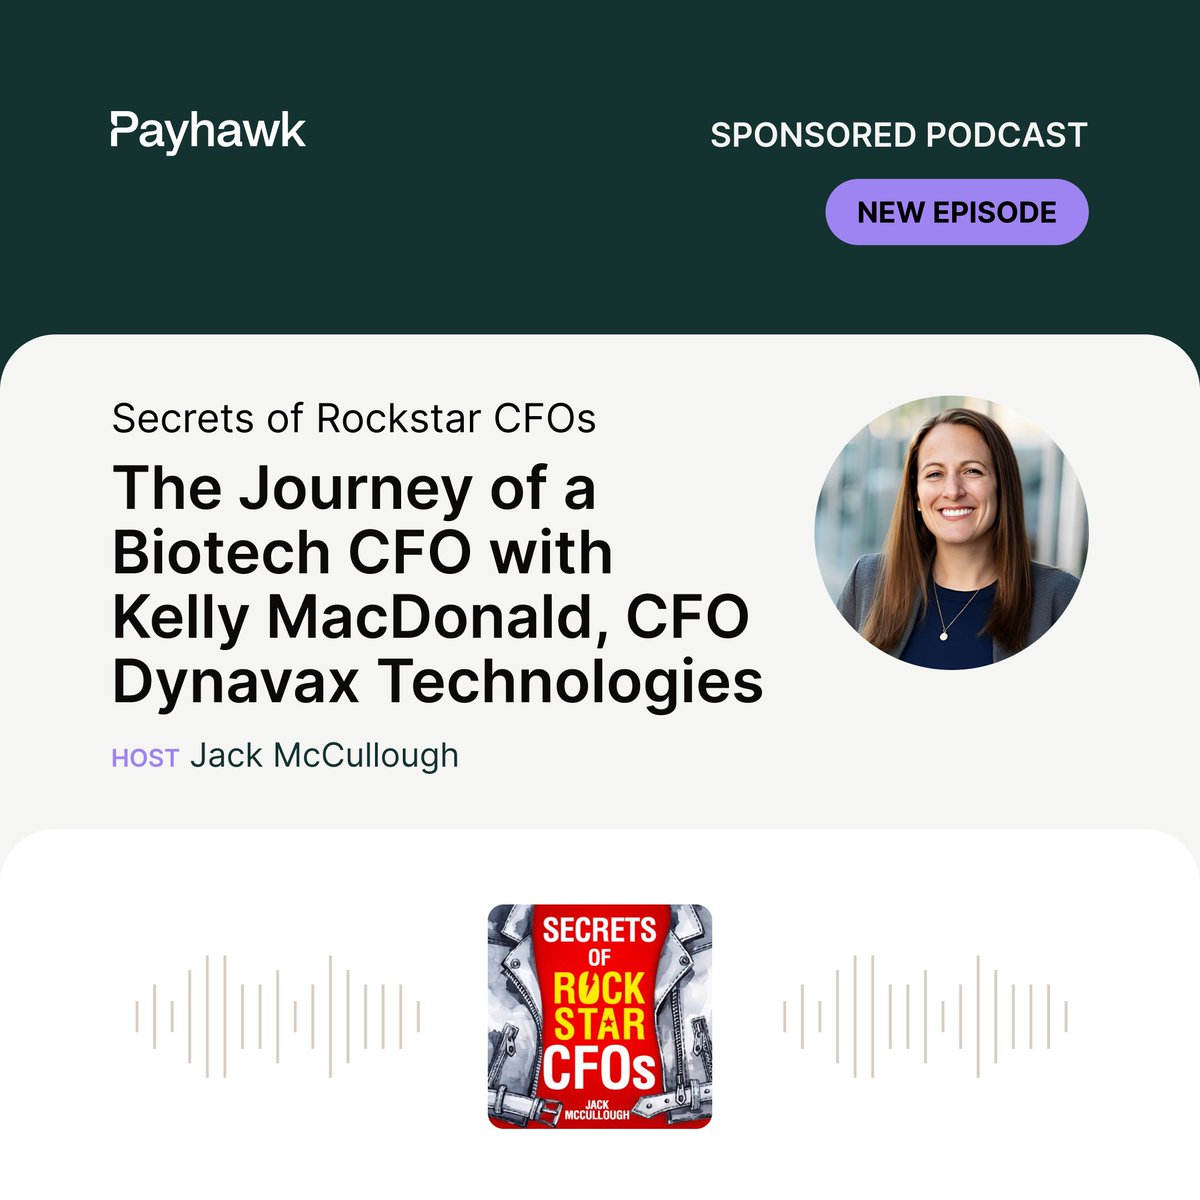 🎙️Join Jack McCullough as he interviews Kelly MacDonald, CFO at Dynavax Technologies, on steering finance during challenges on the 'Secrets of Rockstar CFOs' podcast. Listen now: strategiccfo360.com/breaking-into-… This episode is proudly sponsored by Payhawk.